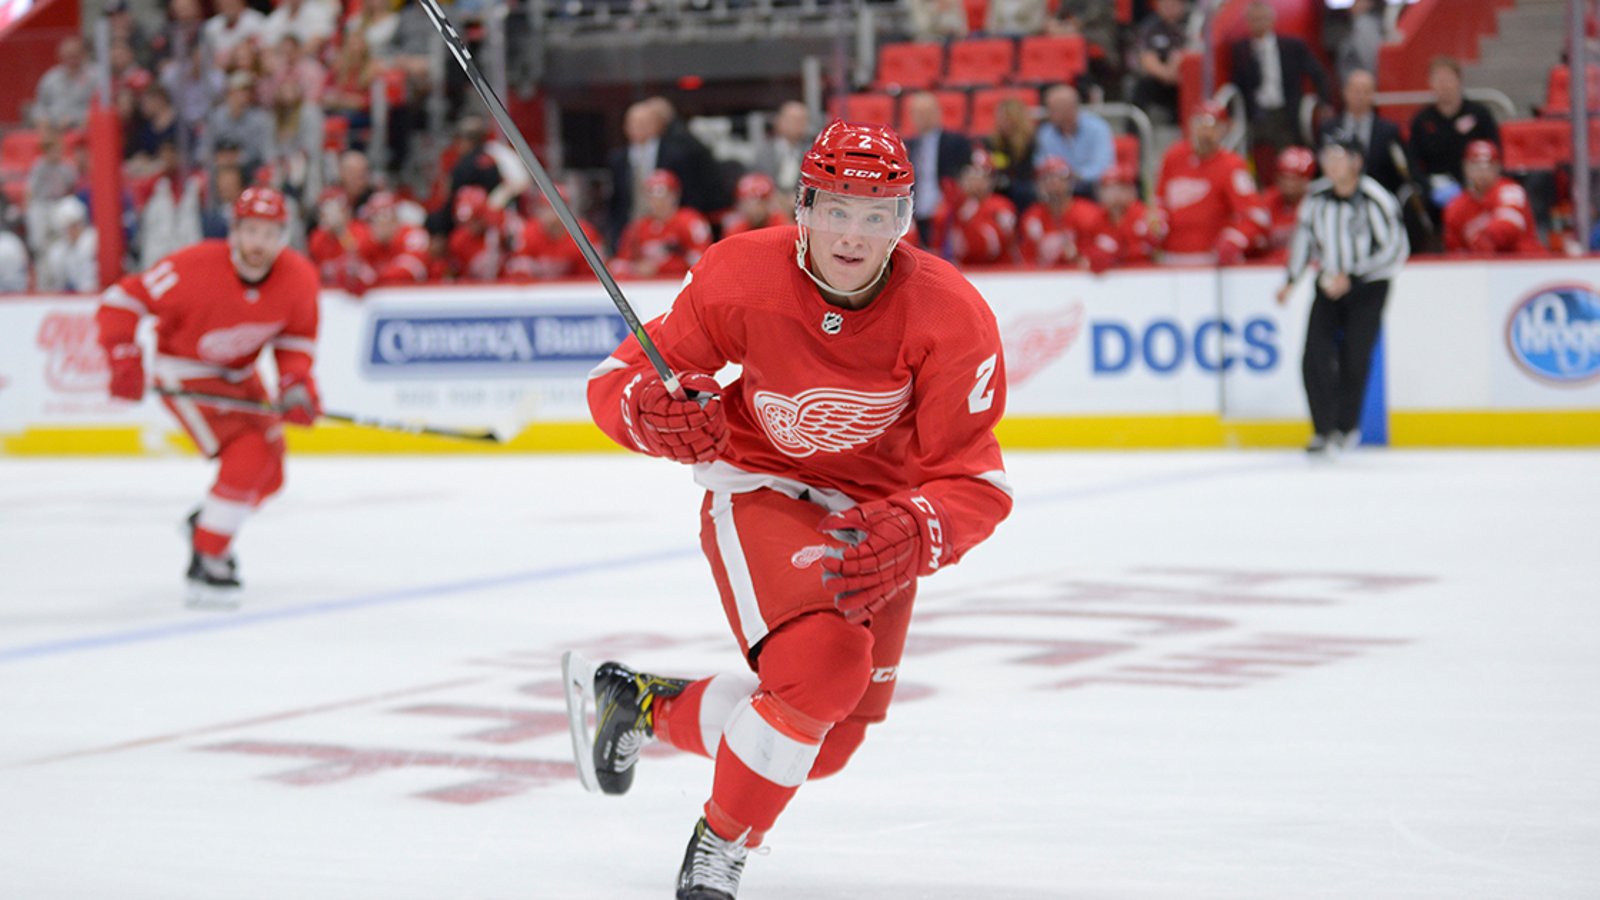 Red Wings rookie Hicketts spins off Wilson, sends him flying into end boards